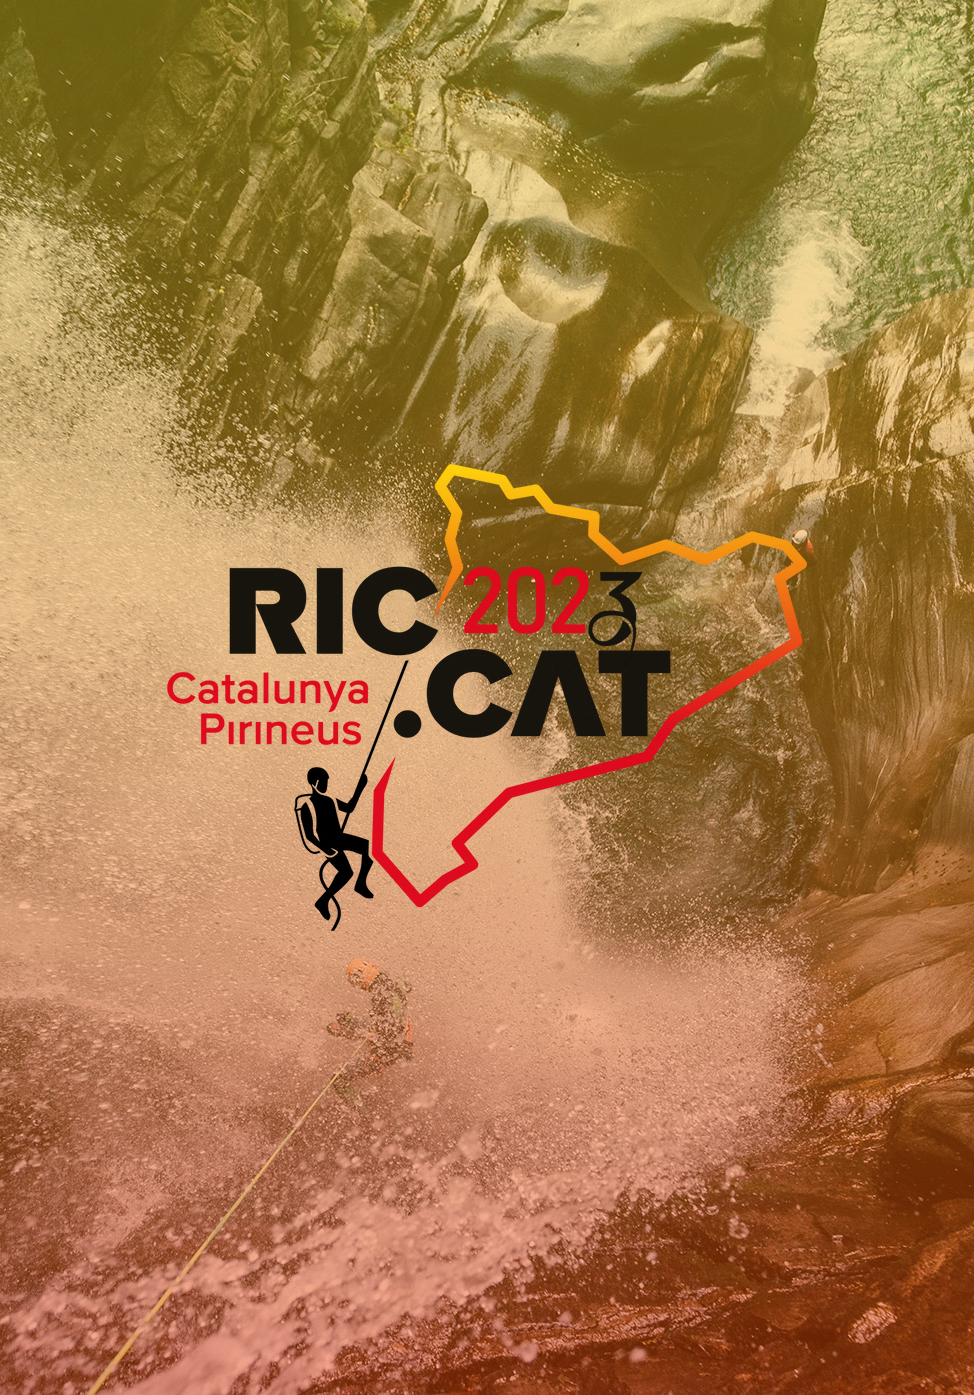 Sign up to the RIC2023 and get 20% OFF the Canyoning Level 2 course